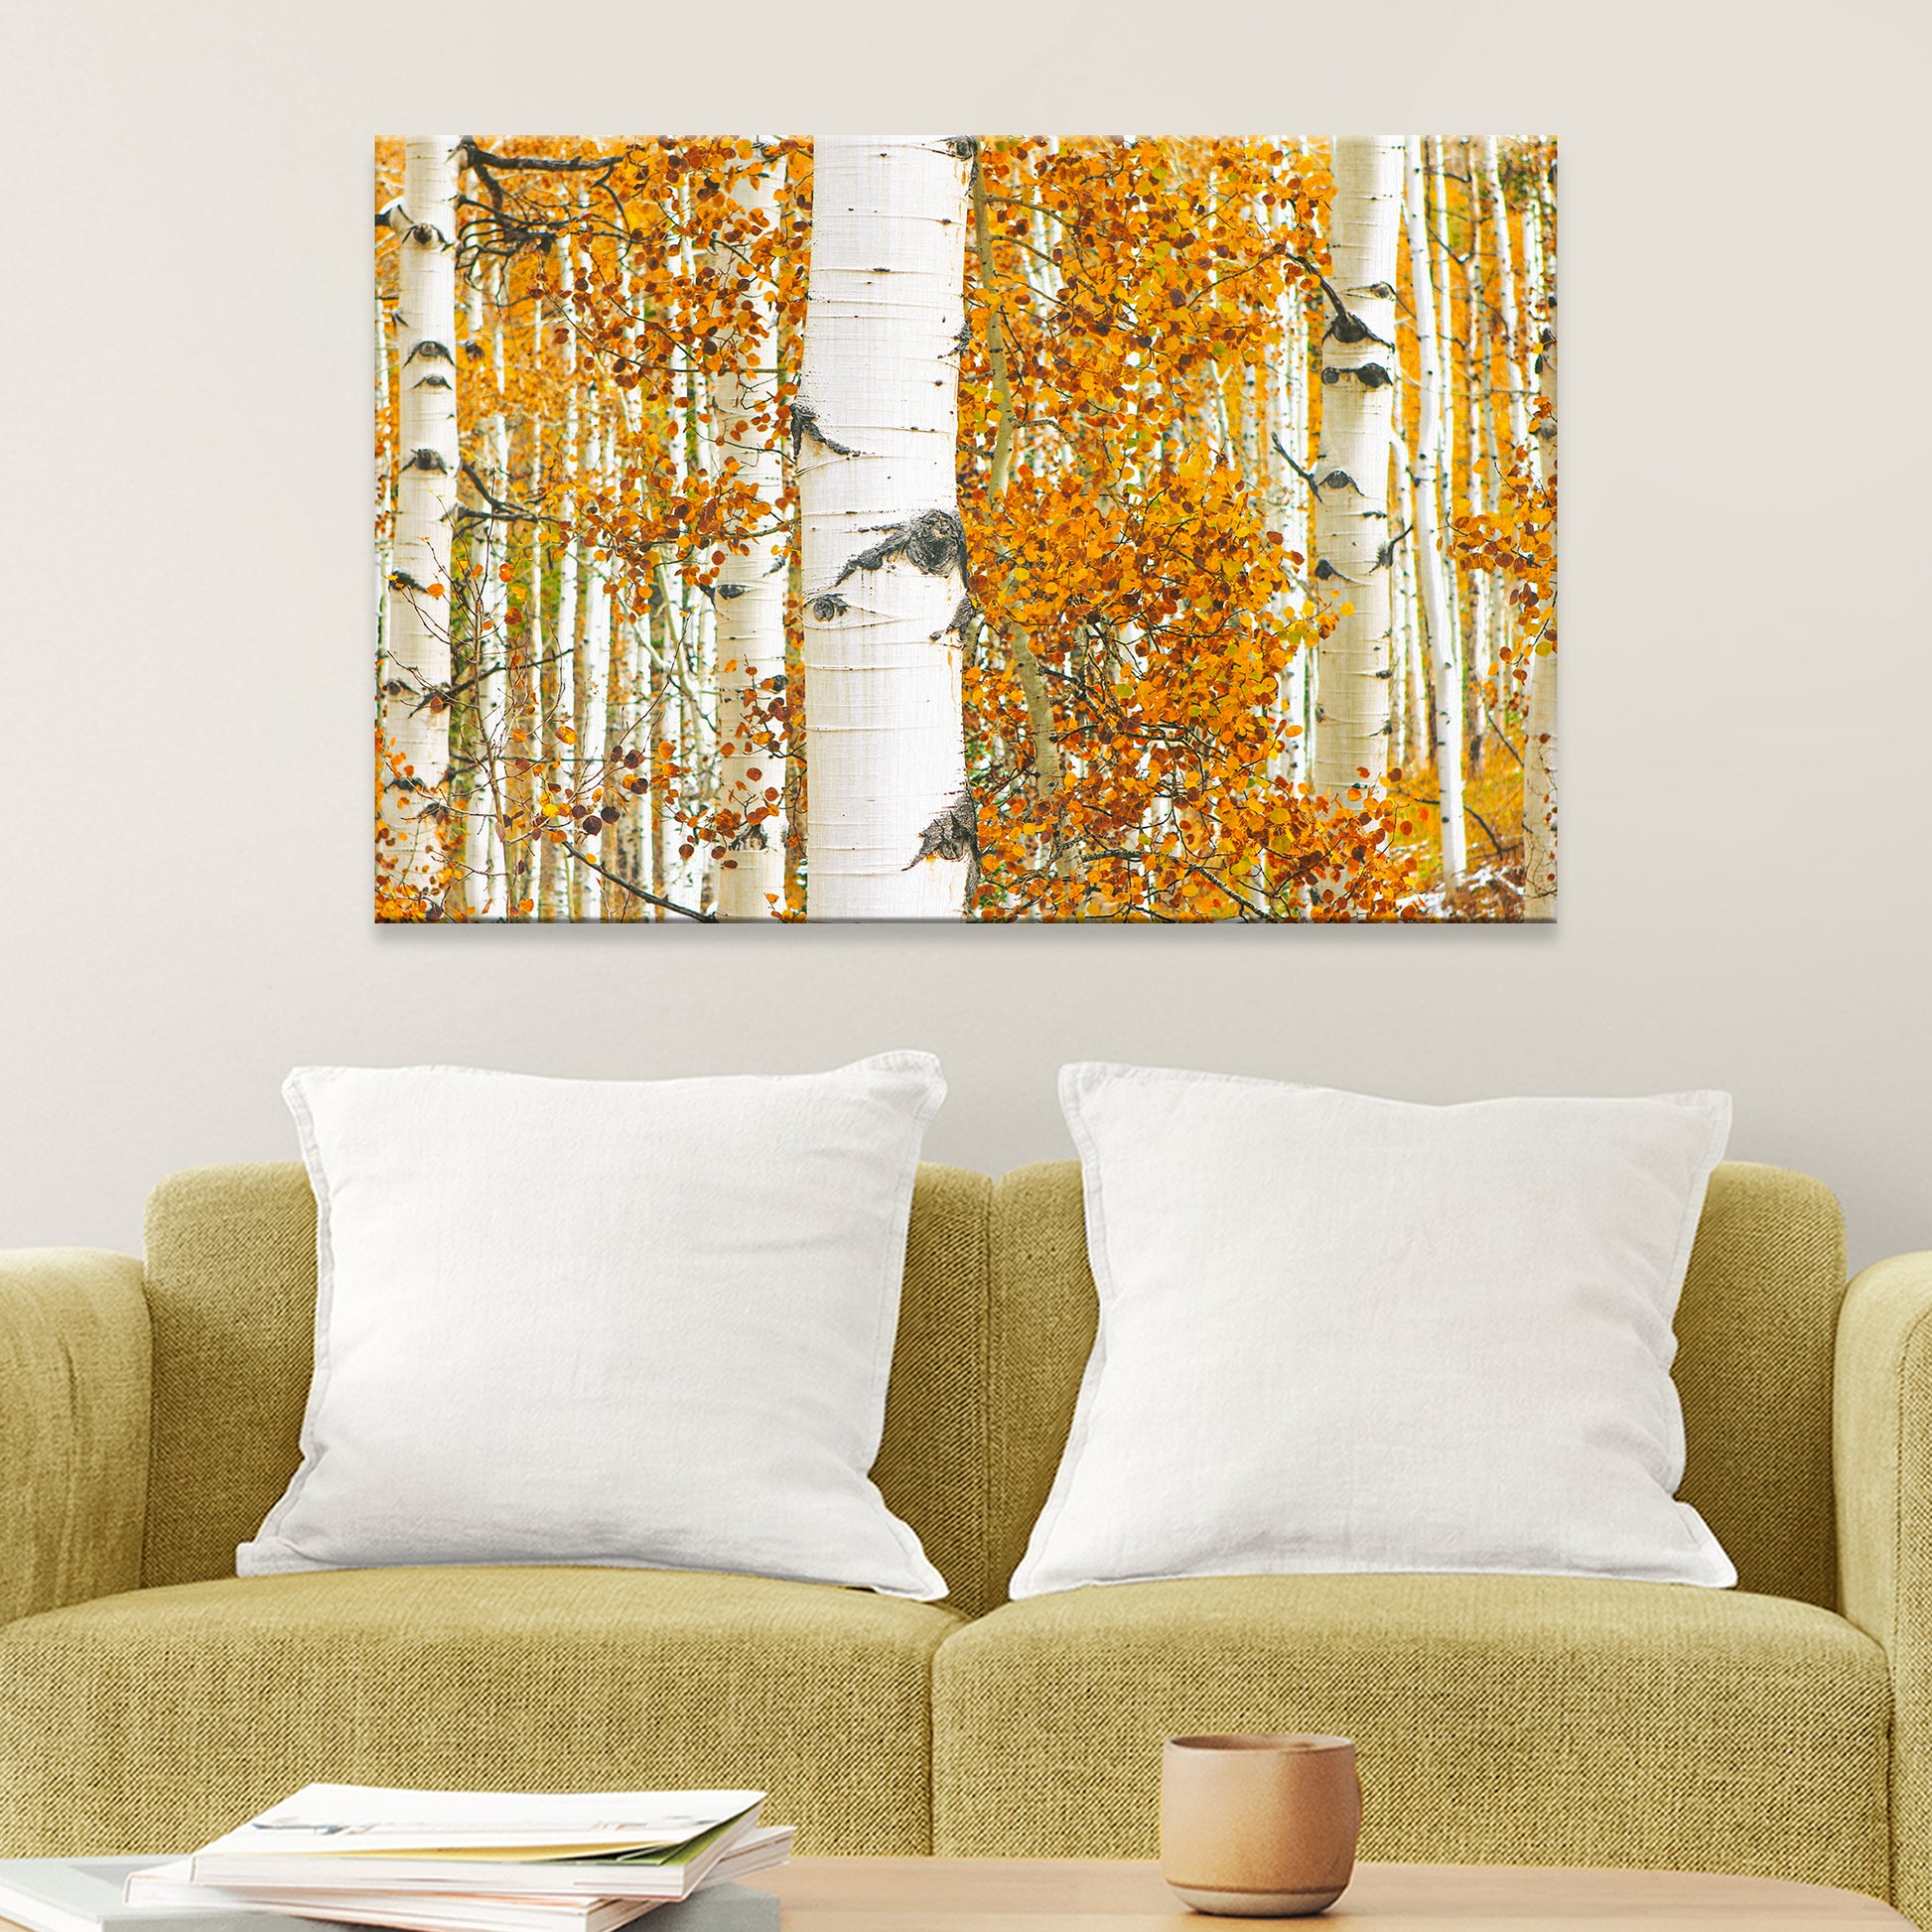 Autumn Tree Barks Canvas Wall Art - Image by Tailored Canvases